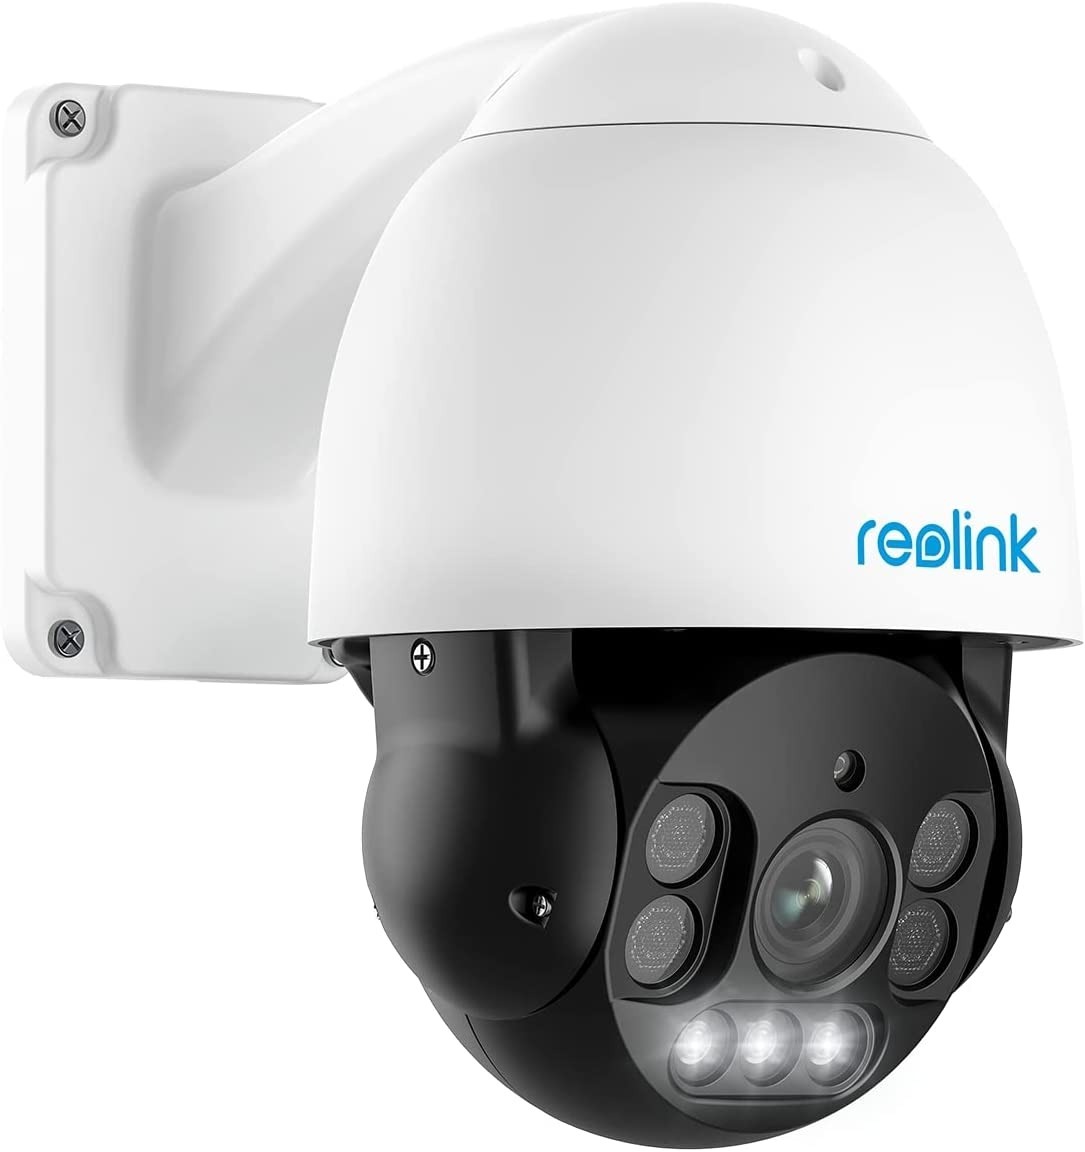 Reolink RLC-823A - 4K PTZ PoE Security Camera w/ Auto Tracking, Color Night Vision & 2 Way Talk $175 + Free Shipping